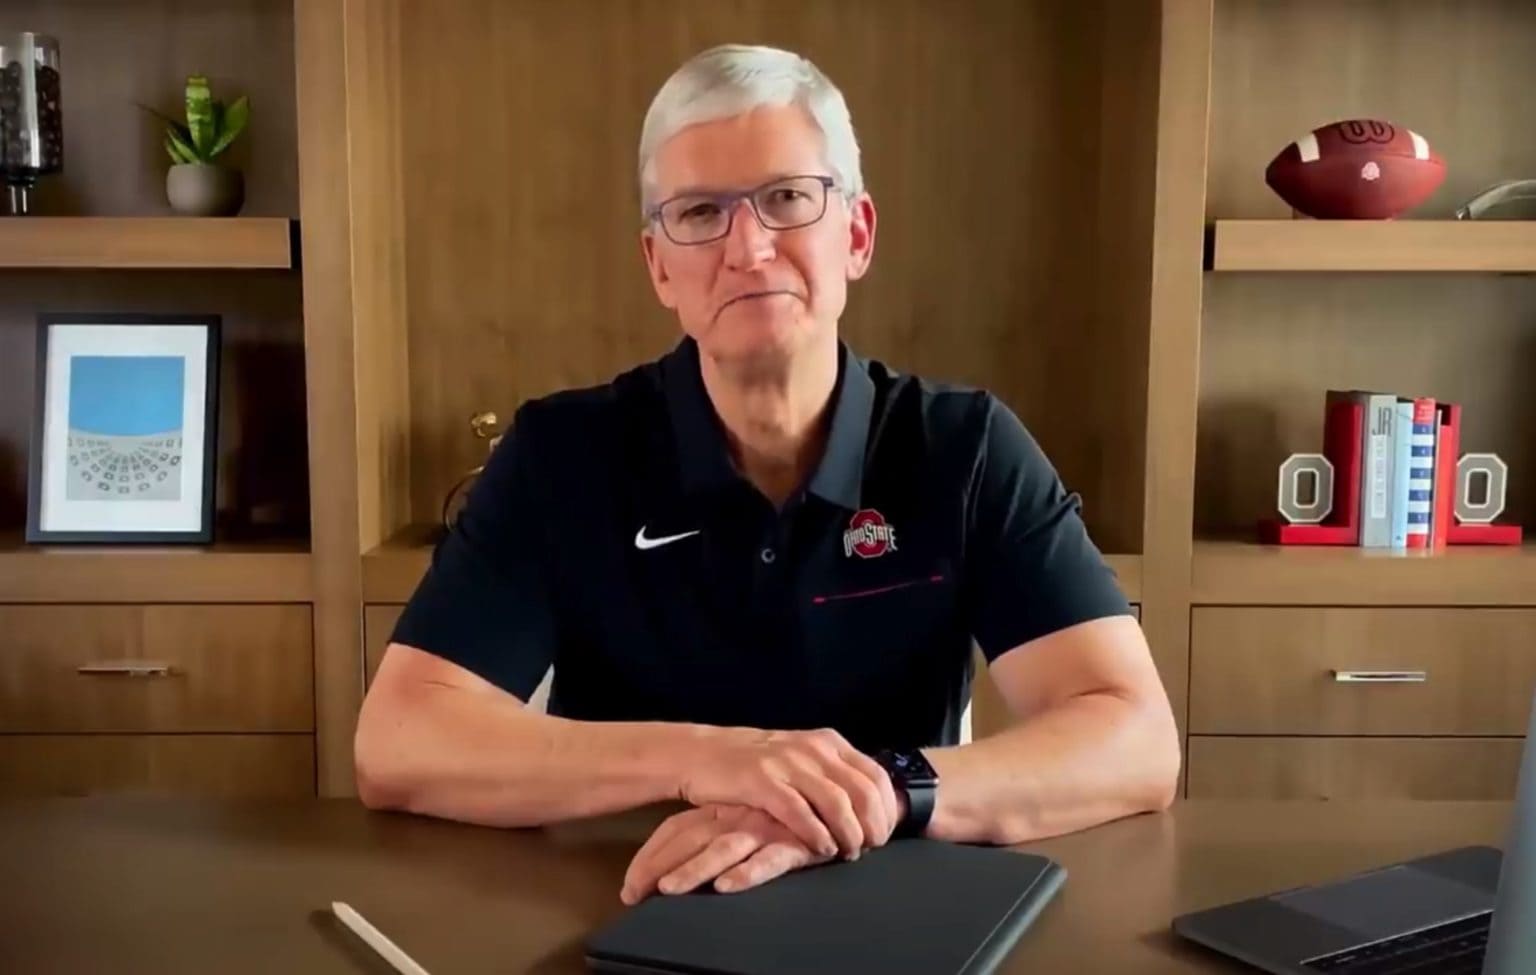 Tim Cook called for Ohio State University grads to embrace hope in a fearful time during his virtual commencement address.